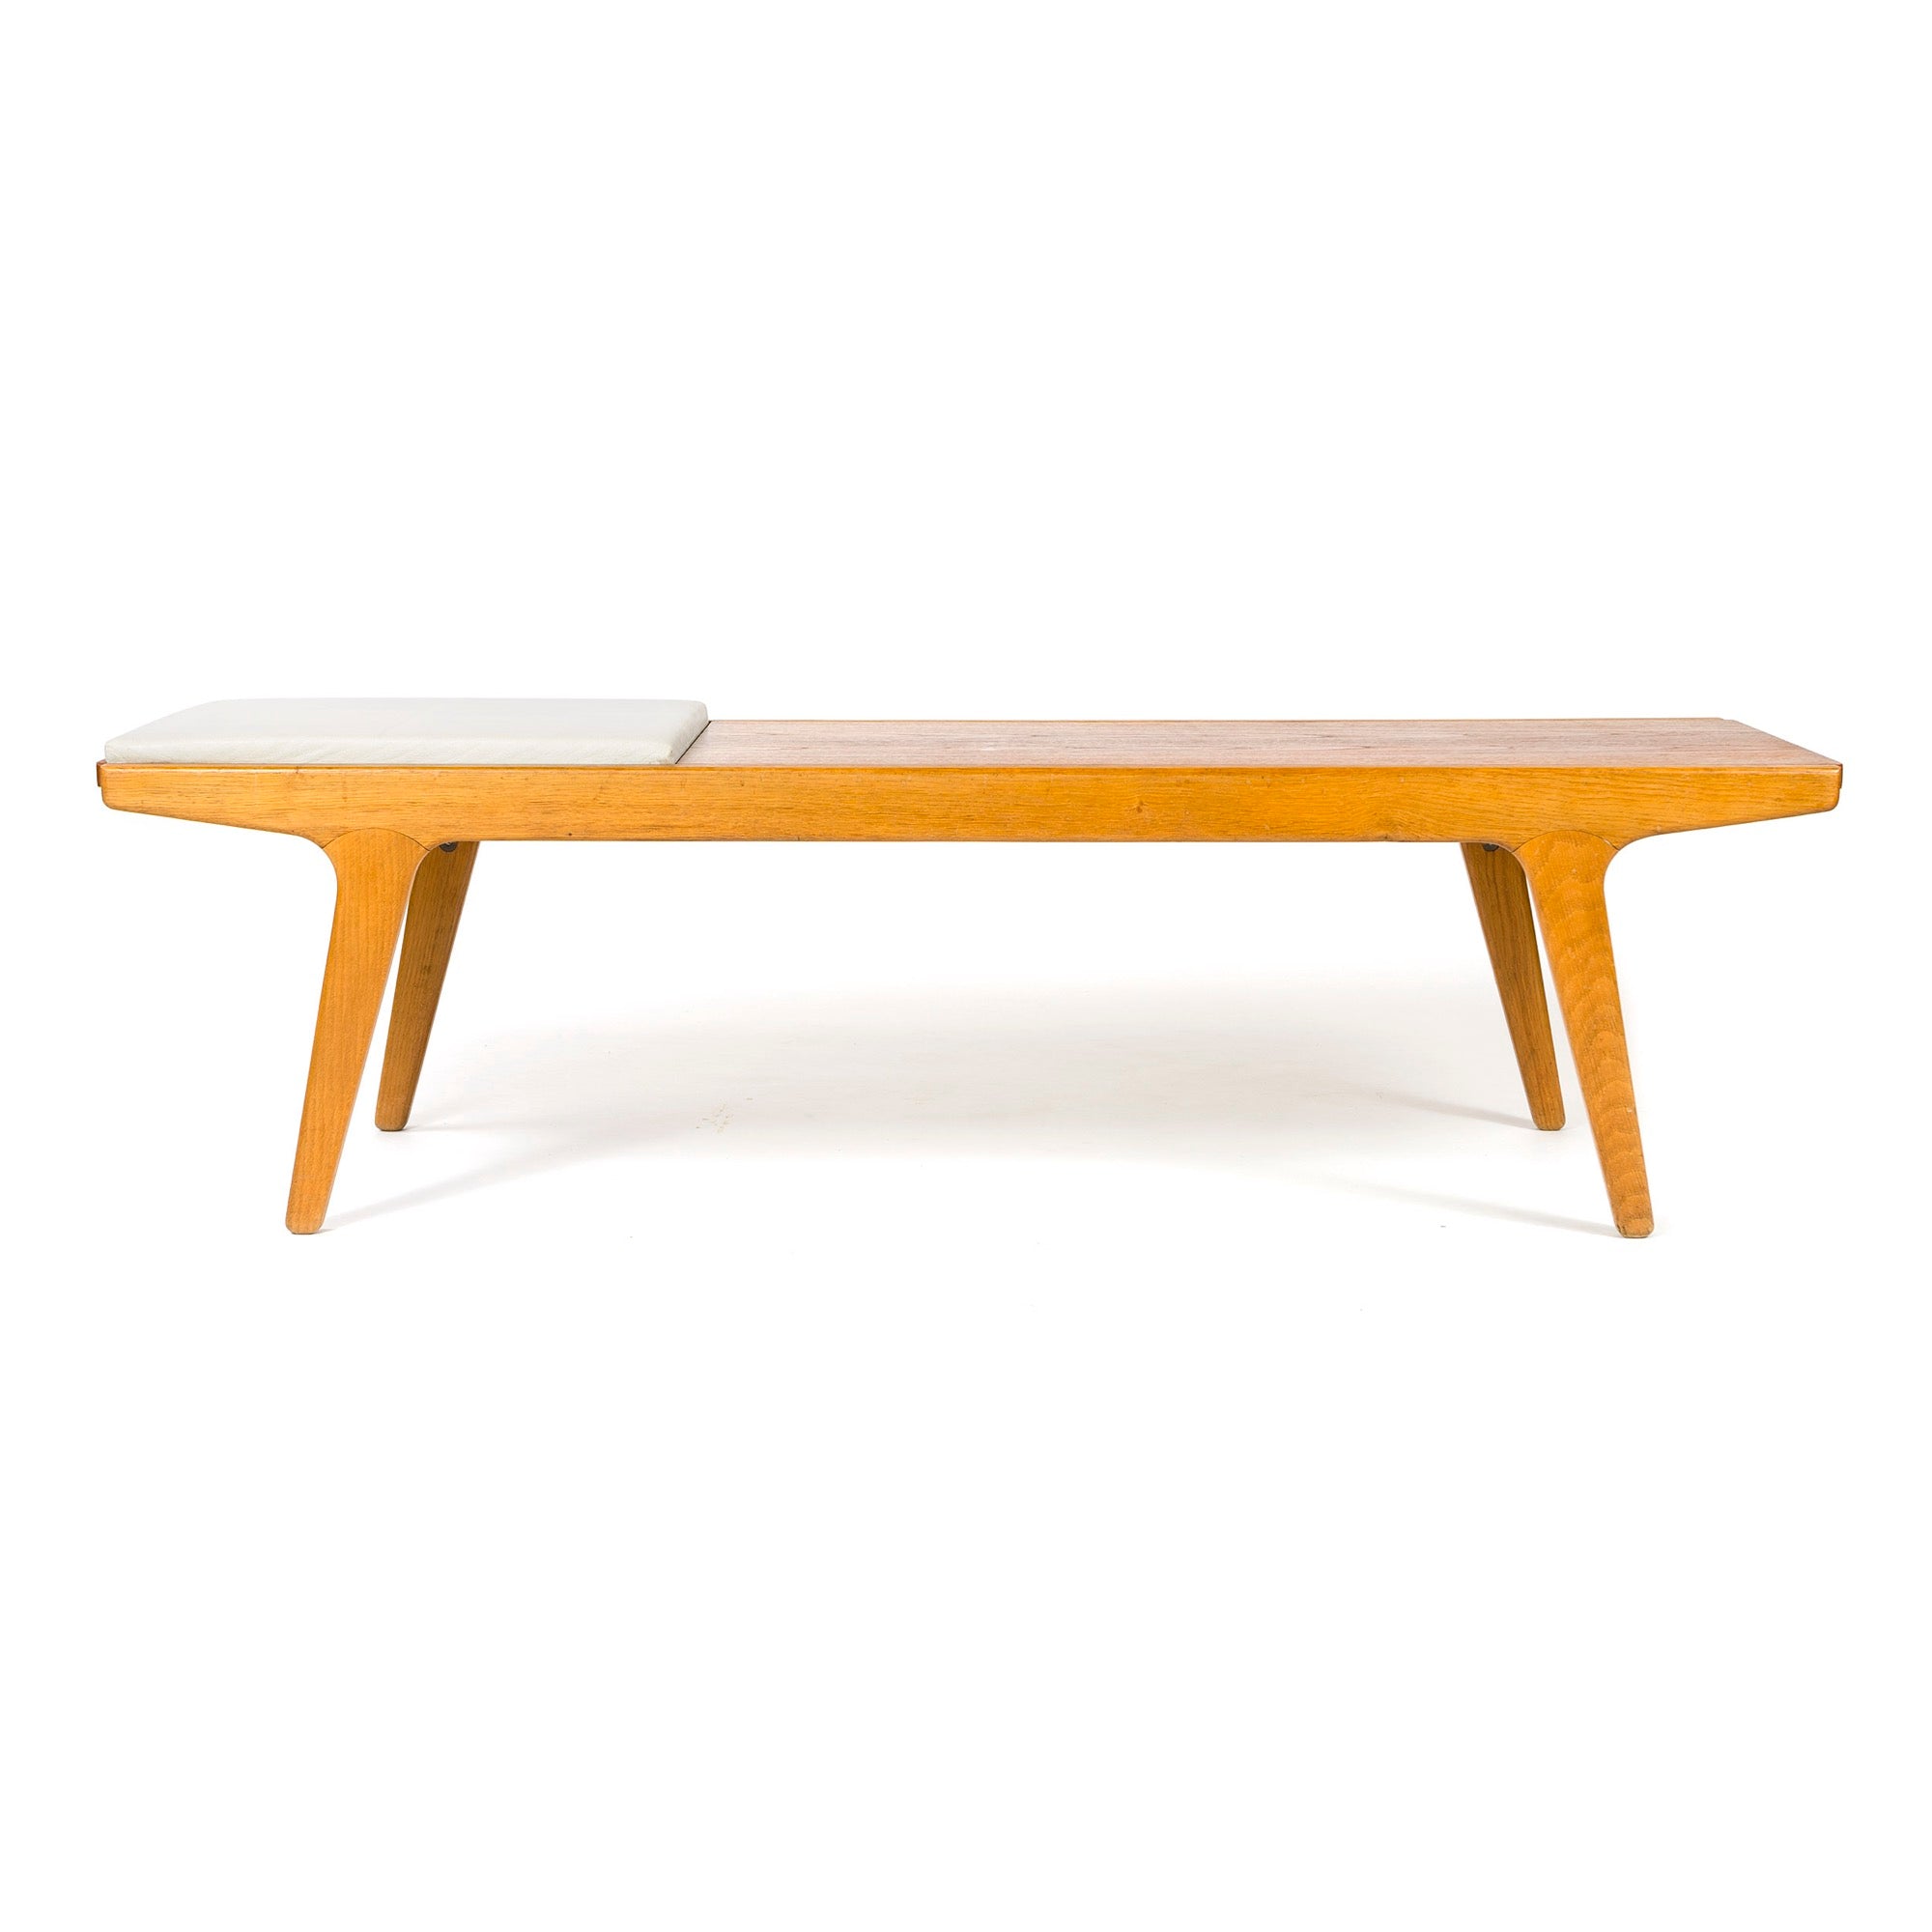 Unique Danish oak bench with a reversible leather & teak top by Unknown, 1960s